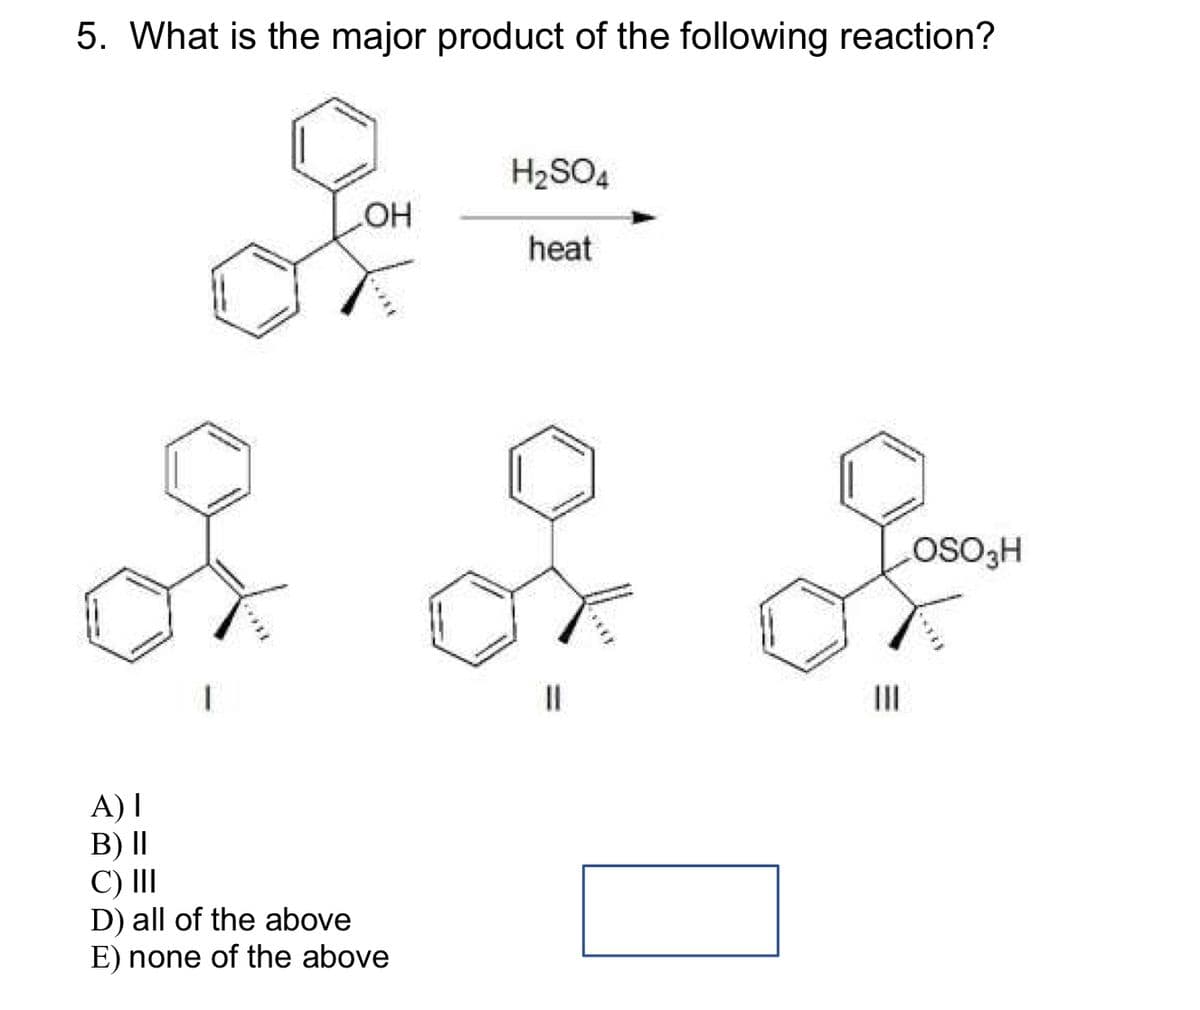 5. What is the major product of the following reaction?
OH
A) I
B) ||
C) III
D) all of the above
E) none of the above
H₂SO4
heat
|||
LOSO3H